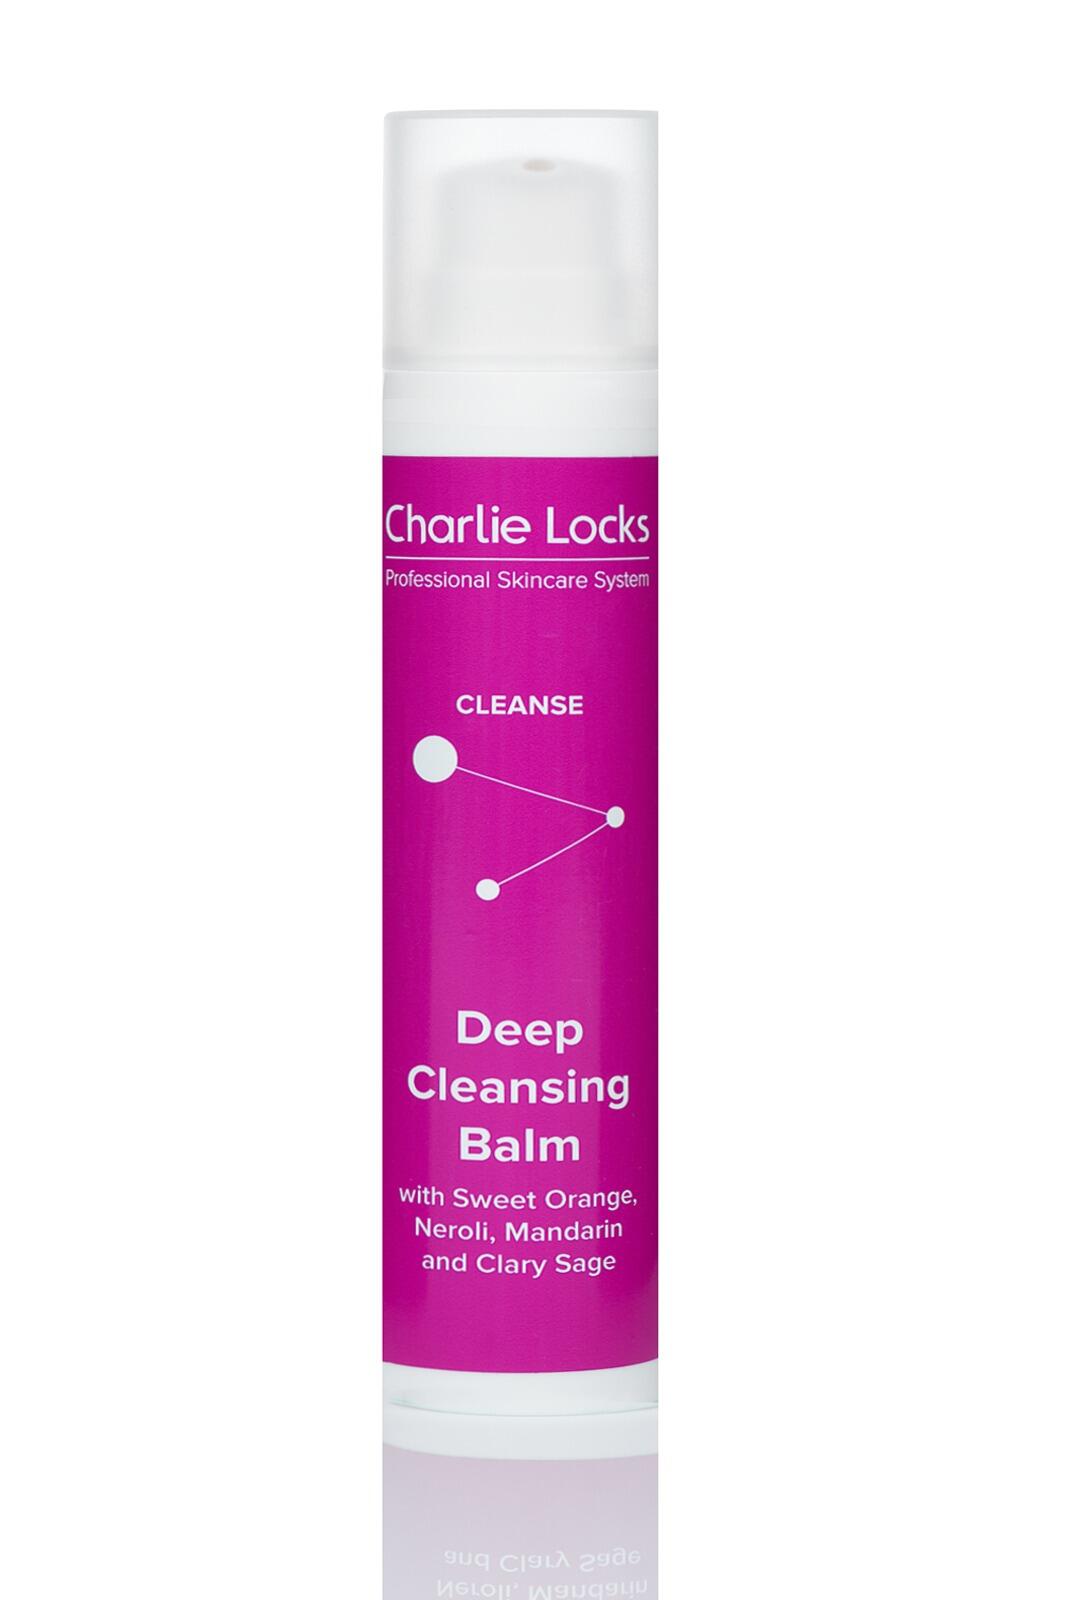 Deep Cleansing Balm 100 ml removes make up and pollution